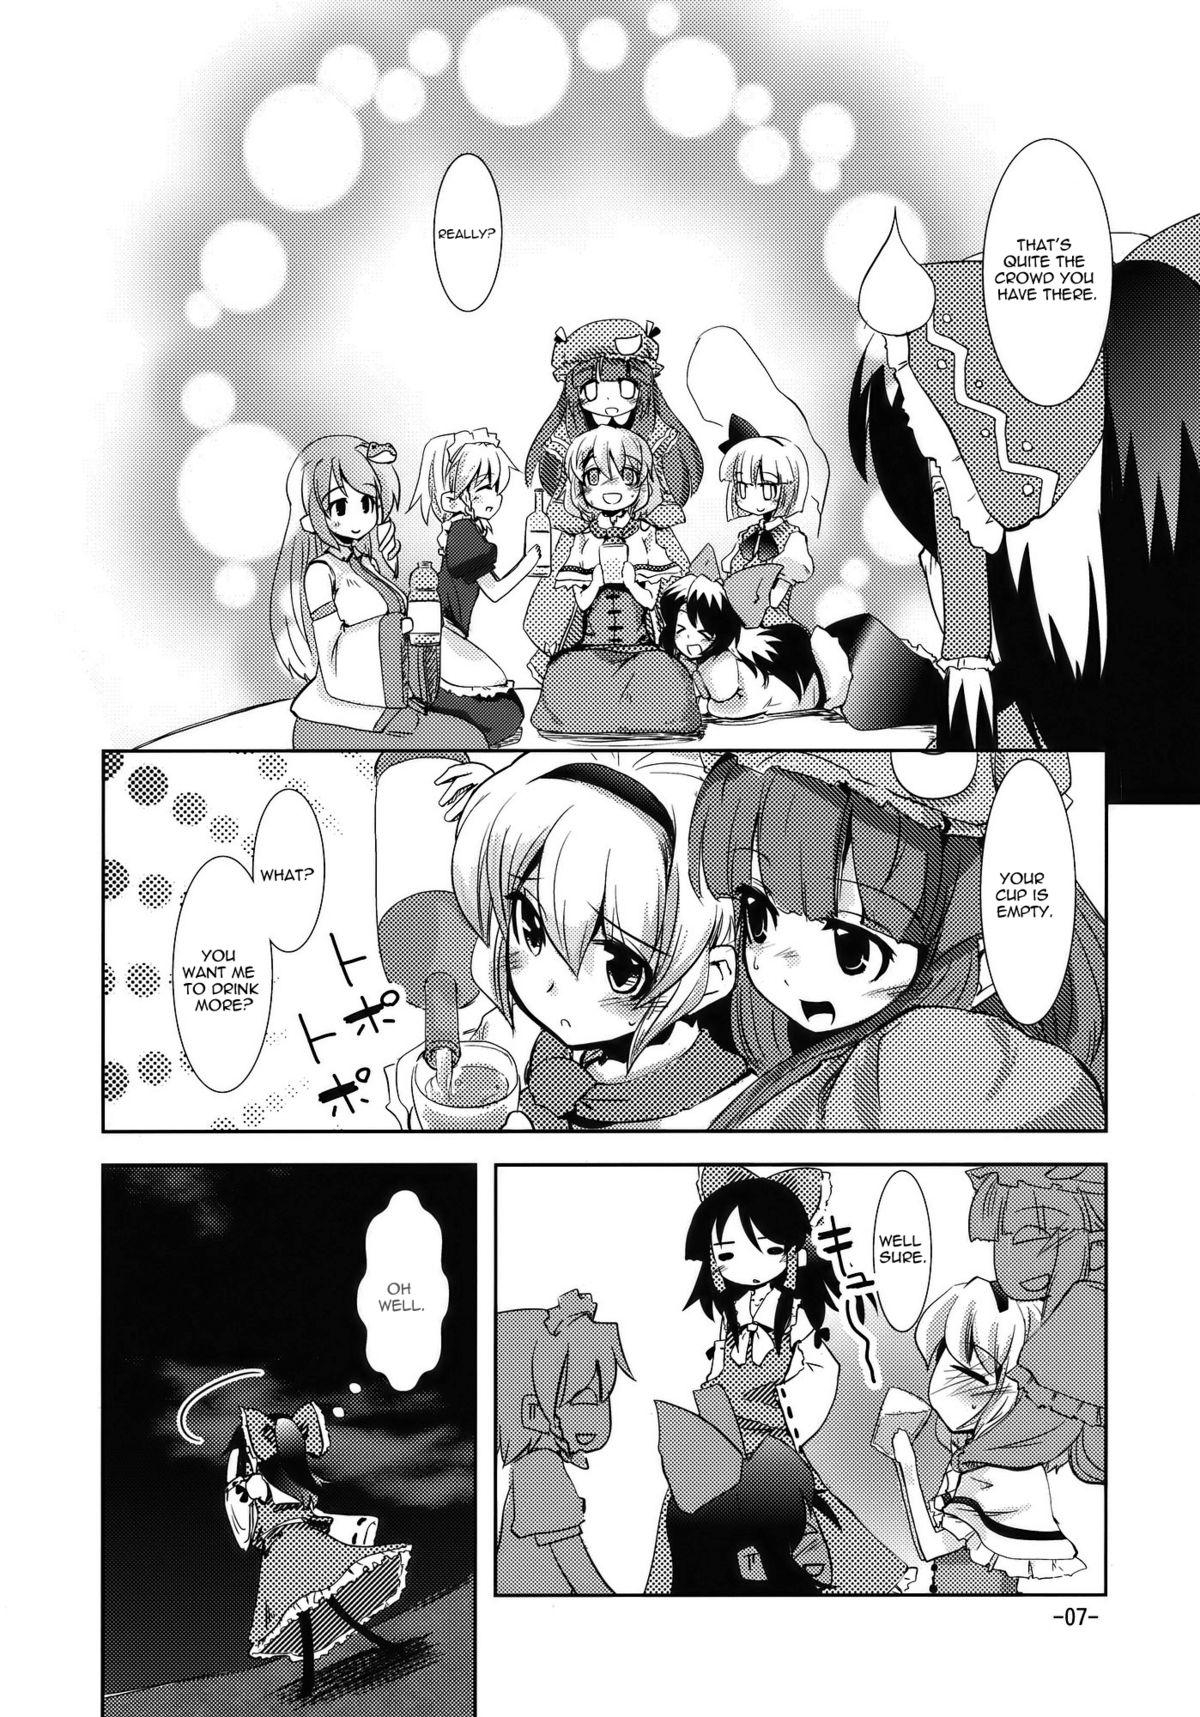 Phat Ass Enkai ni Ikou | Let's go to the party - Touhou project Abuse - Page 7